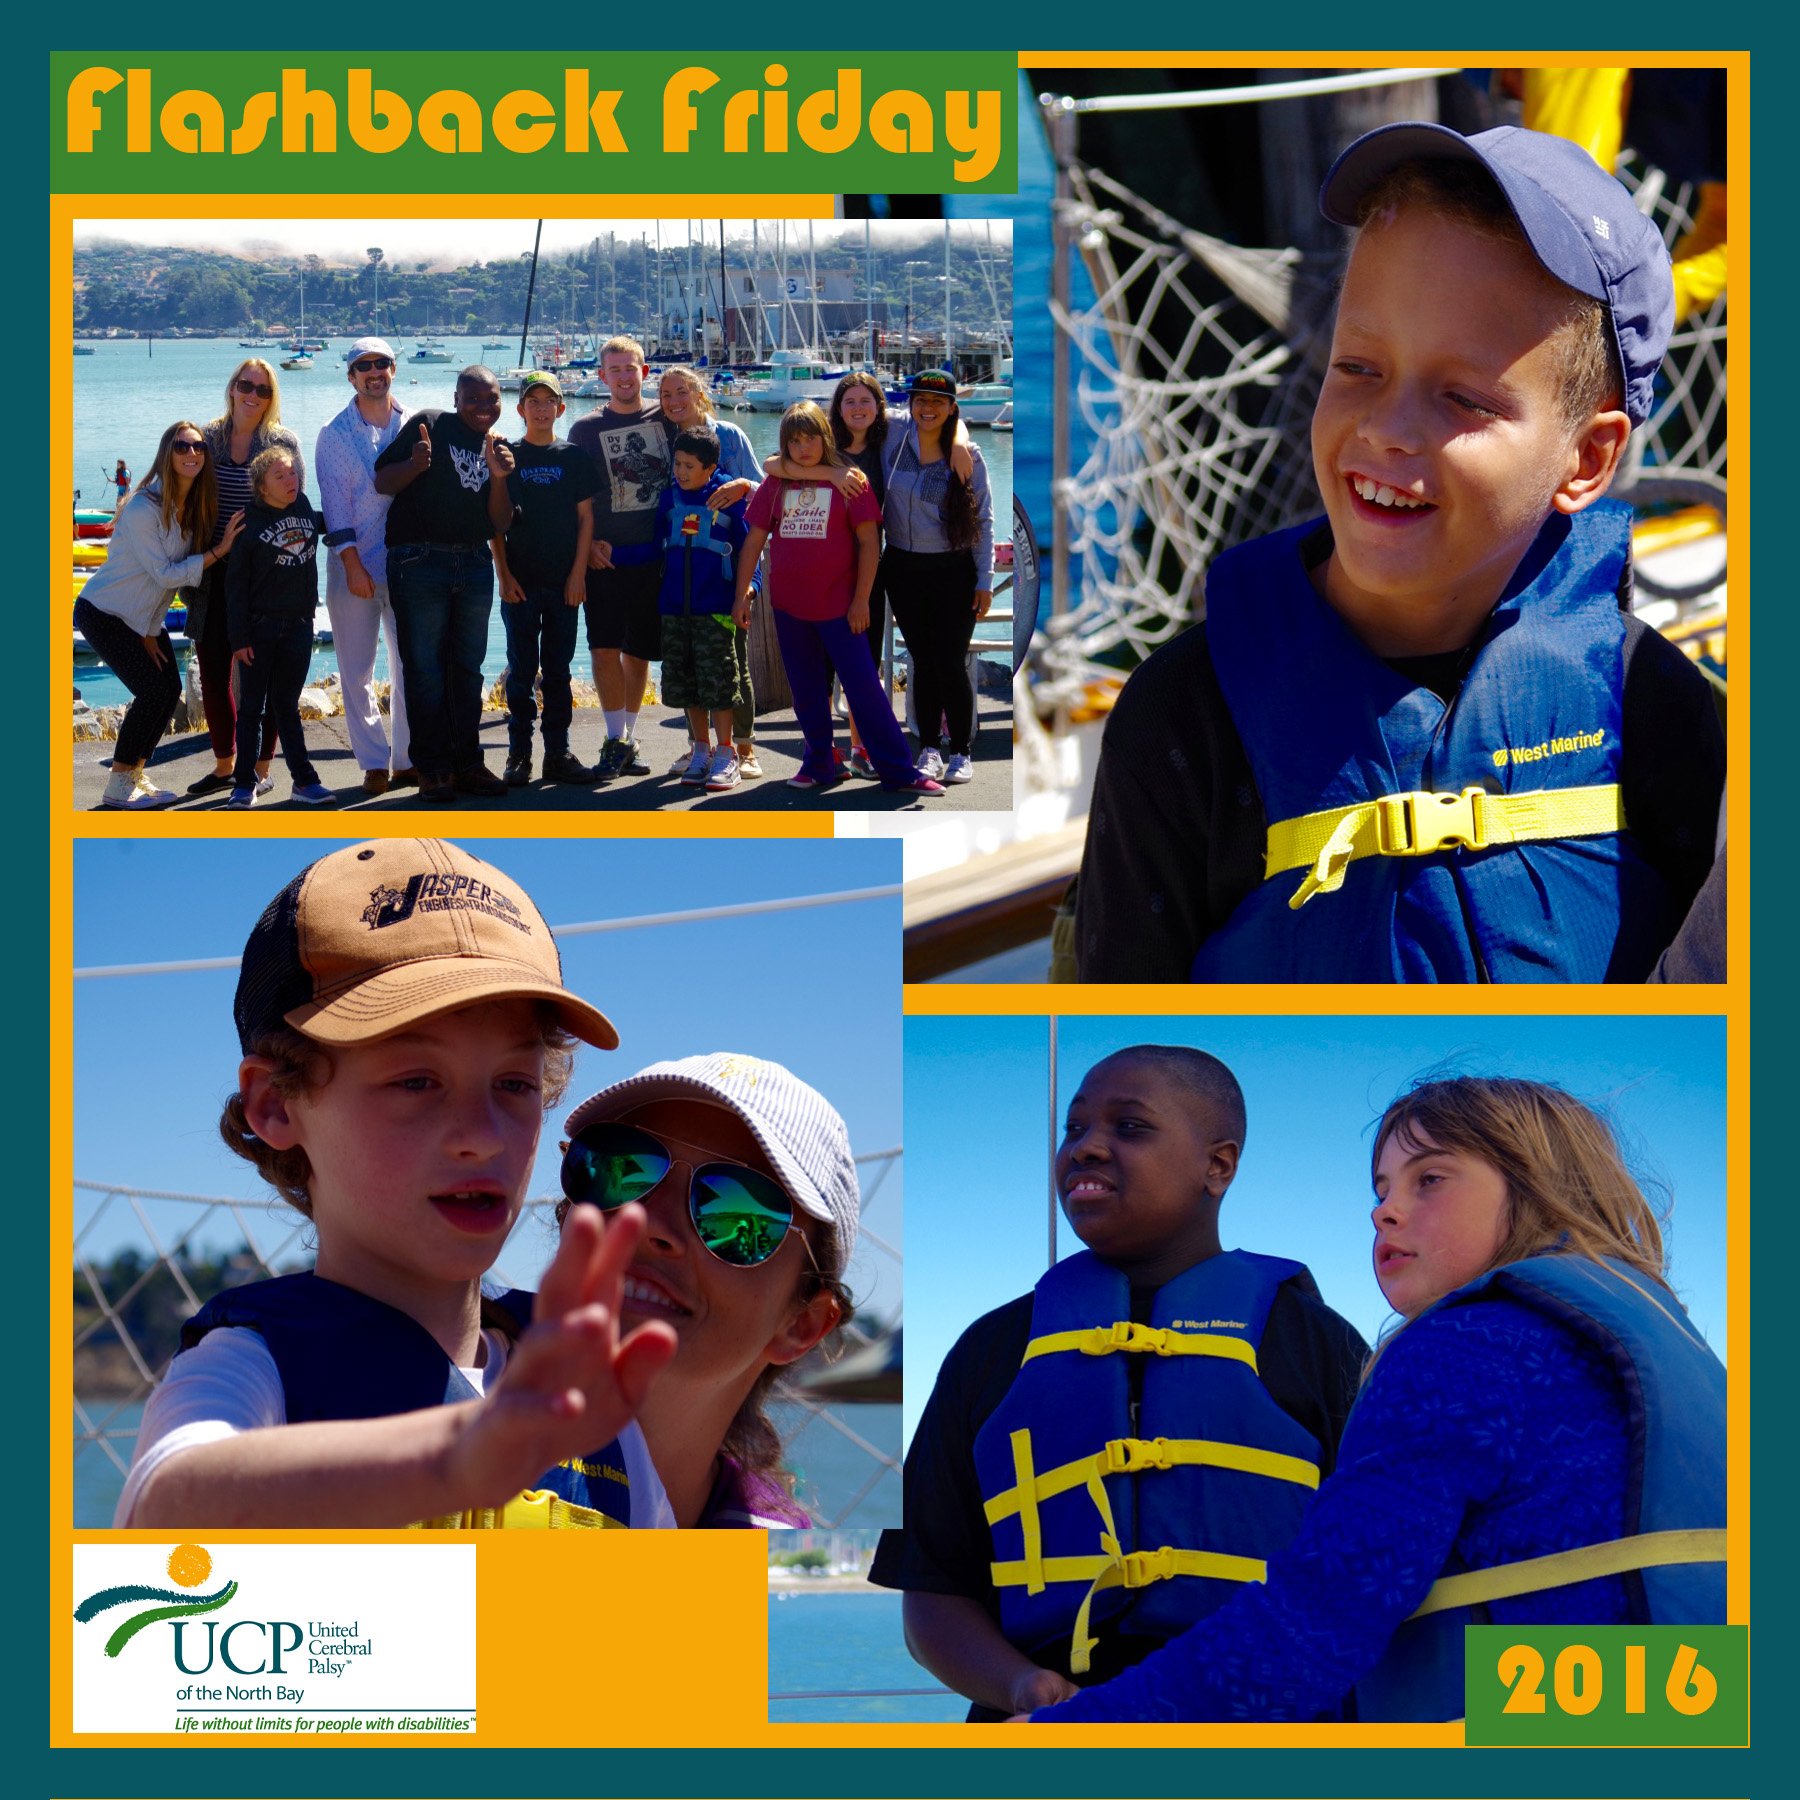 Flashback Friday to 2016 and Cypress School students and staff enjoying a wonderful day sailing on the Bay! Learn more about Cypress School and all of UCP of the North Bay's programs here: http://ucpnb.org